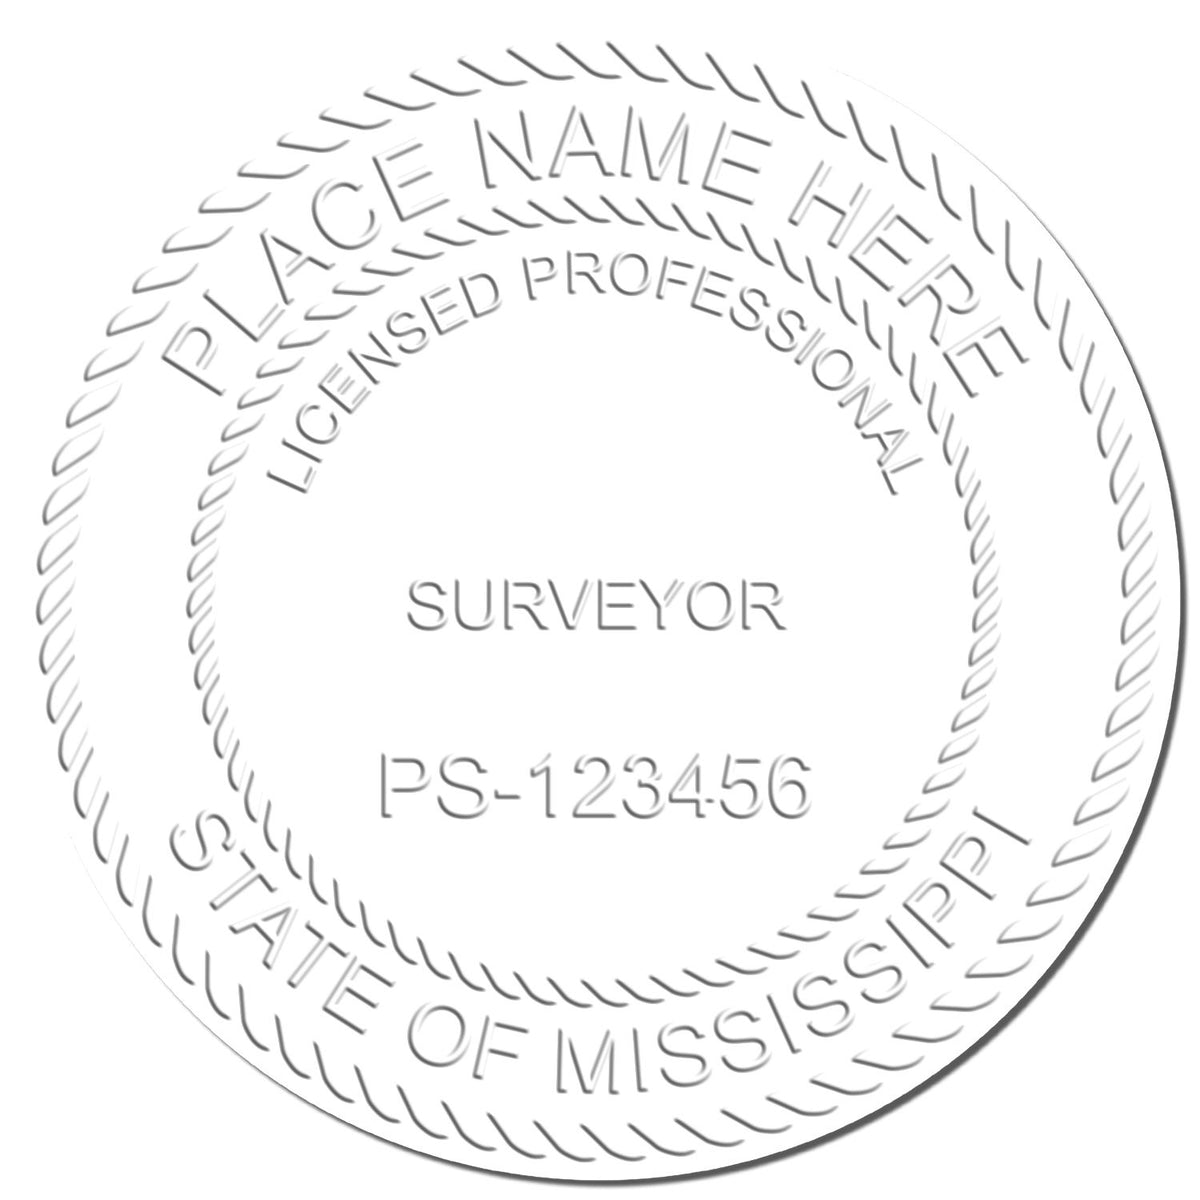 This paper is stamped with a sample imprint of the Heavy Duty Cast Iron Mississippi Land Surveyor Seal Embosser, signifying its quality and reliability.